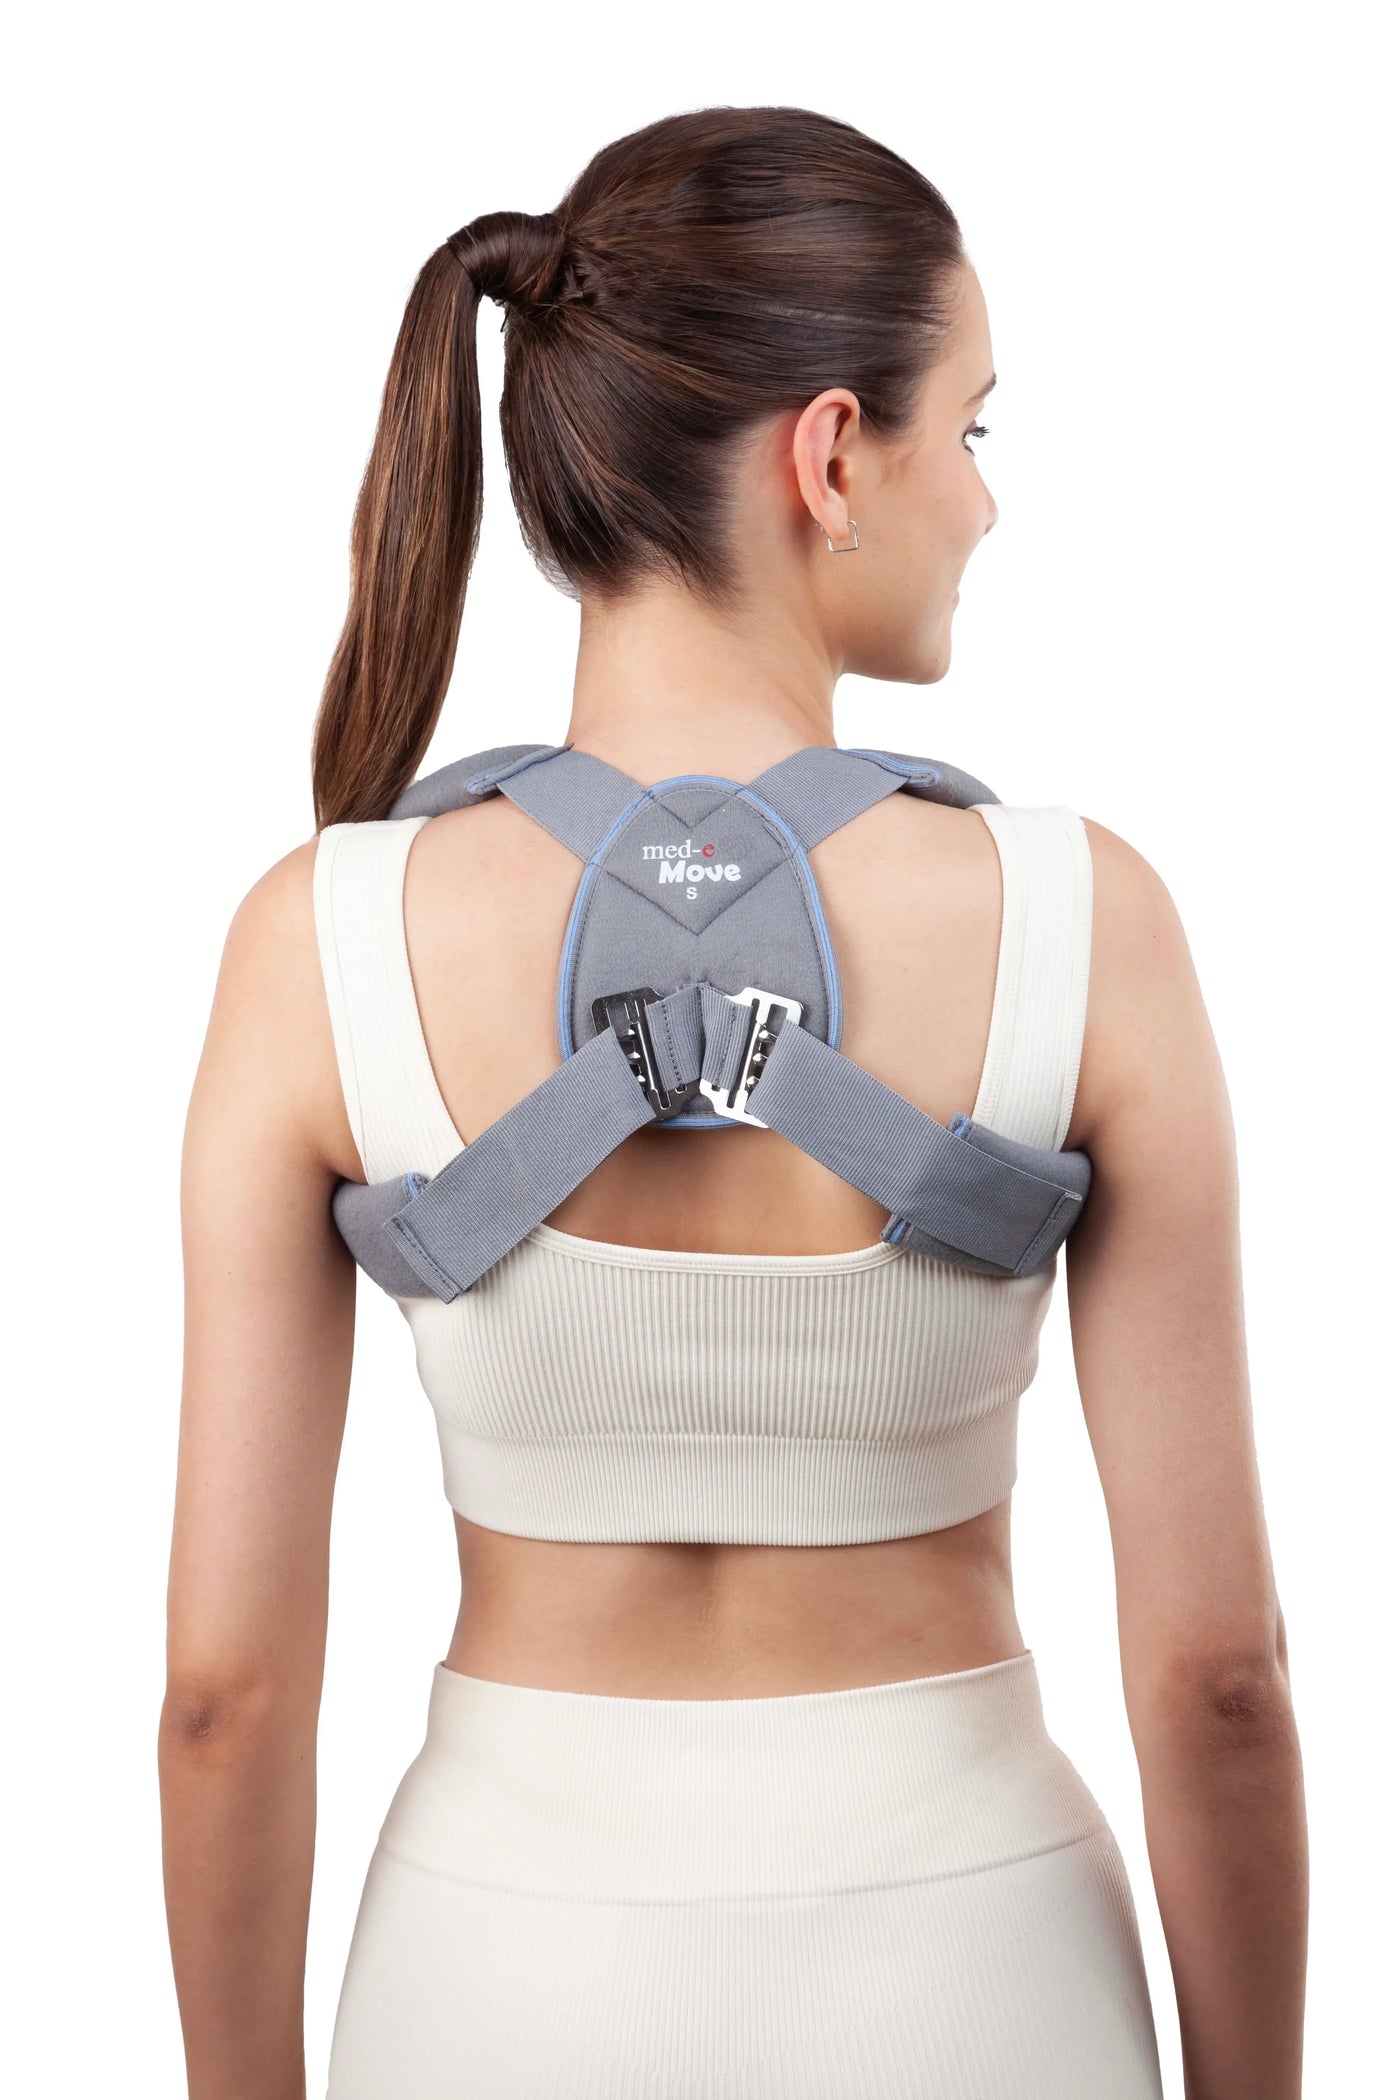 Medemove Clavicle Brace with Buckle